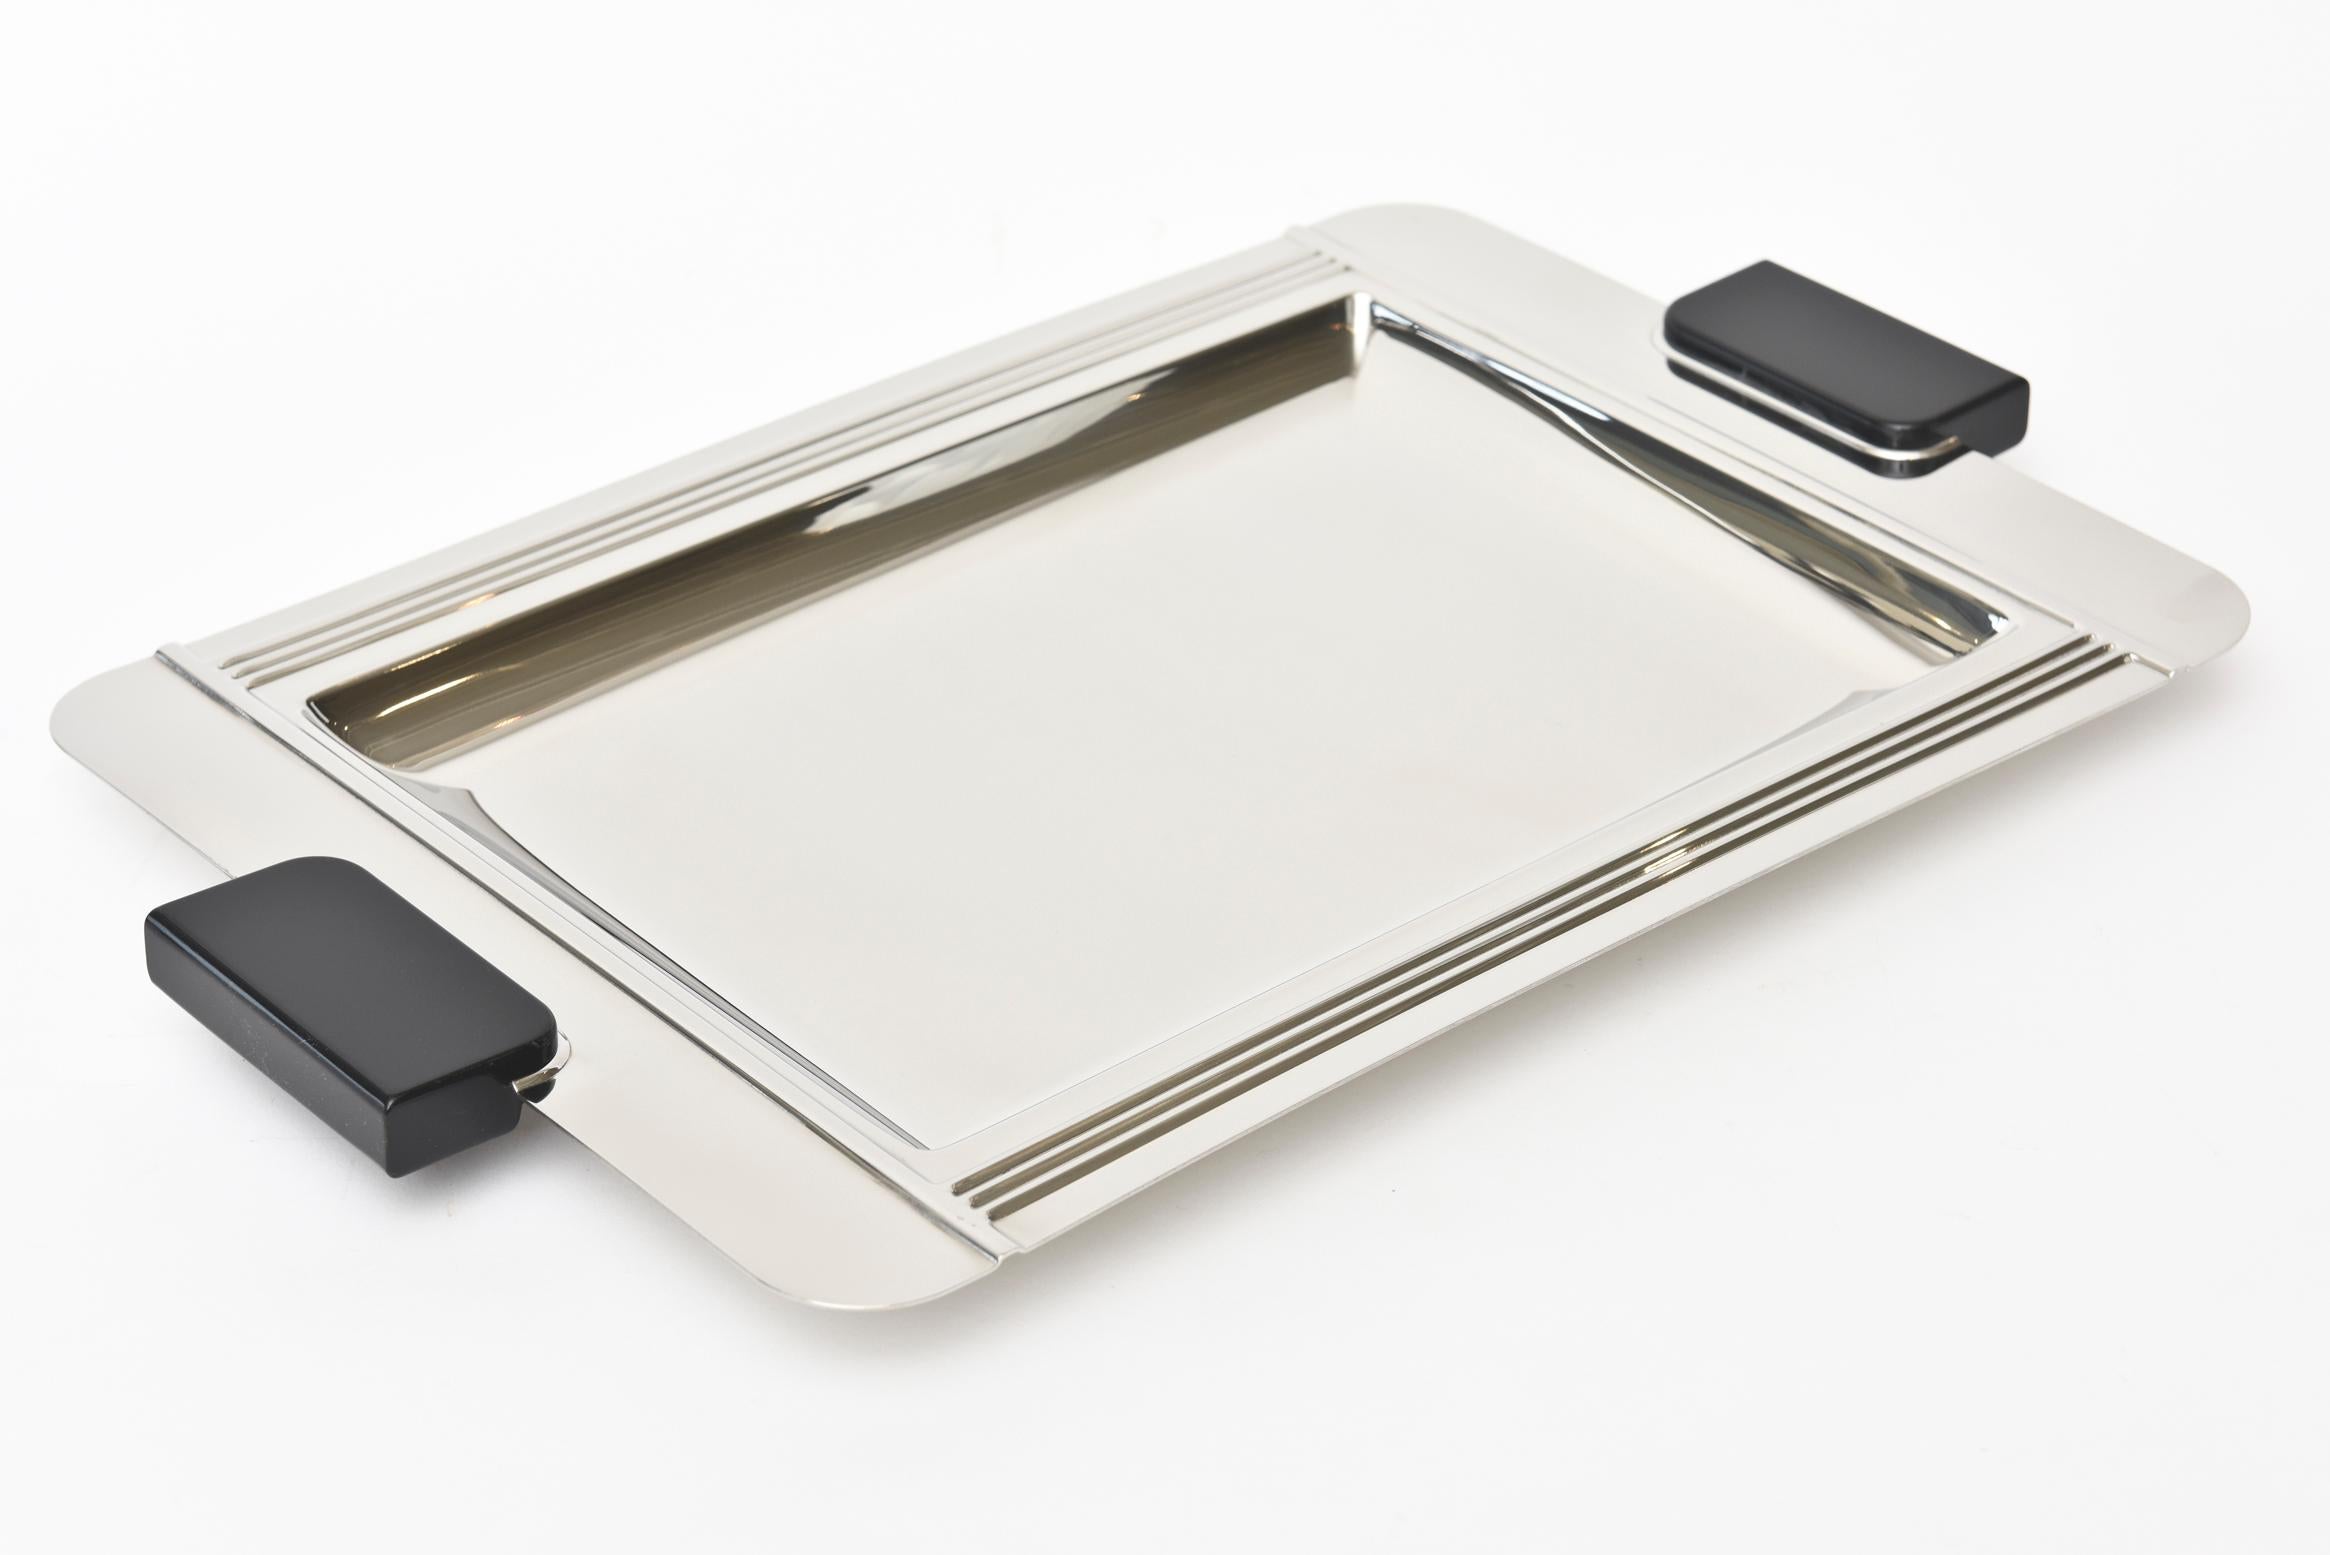 This wonderful French polished Art Deco stainless steel and resin handled tray is signed Couzon Acier Inox 18/10 France. The deco lines add to the simplicity and handsome lines to the tray. Great barware and a great serving tray.
The inside